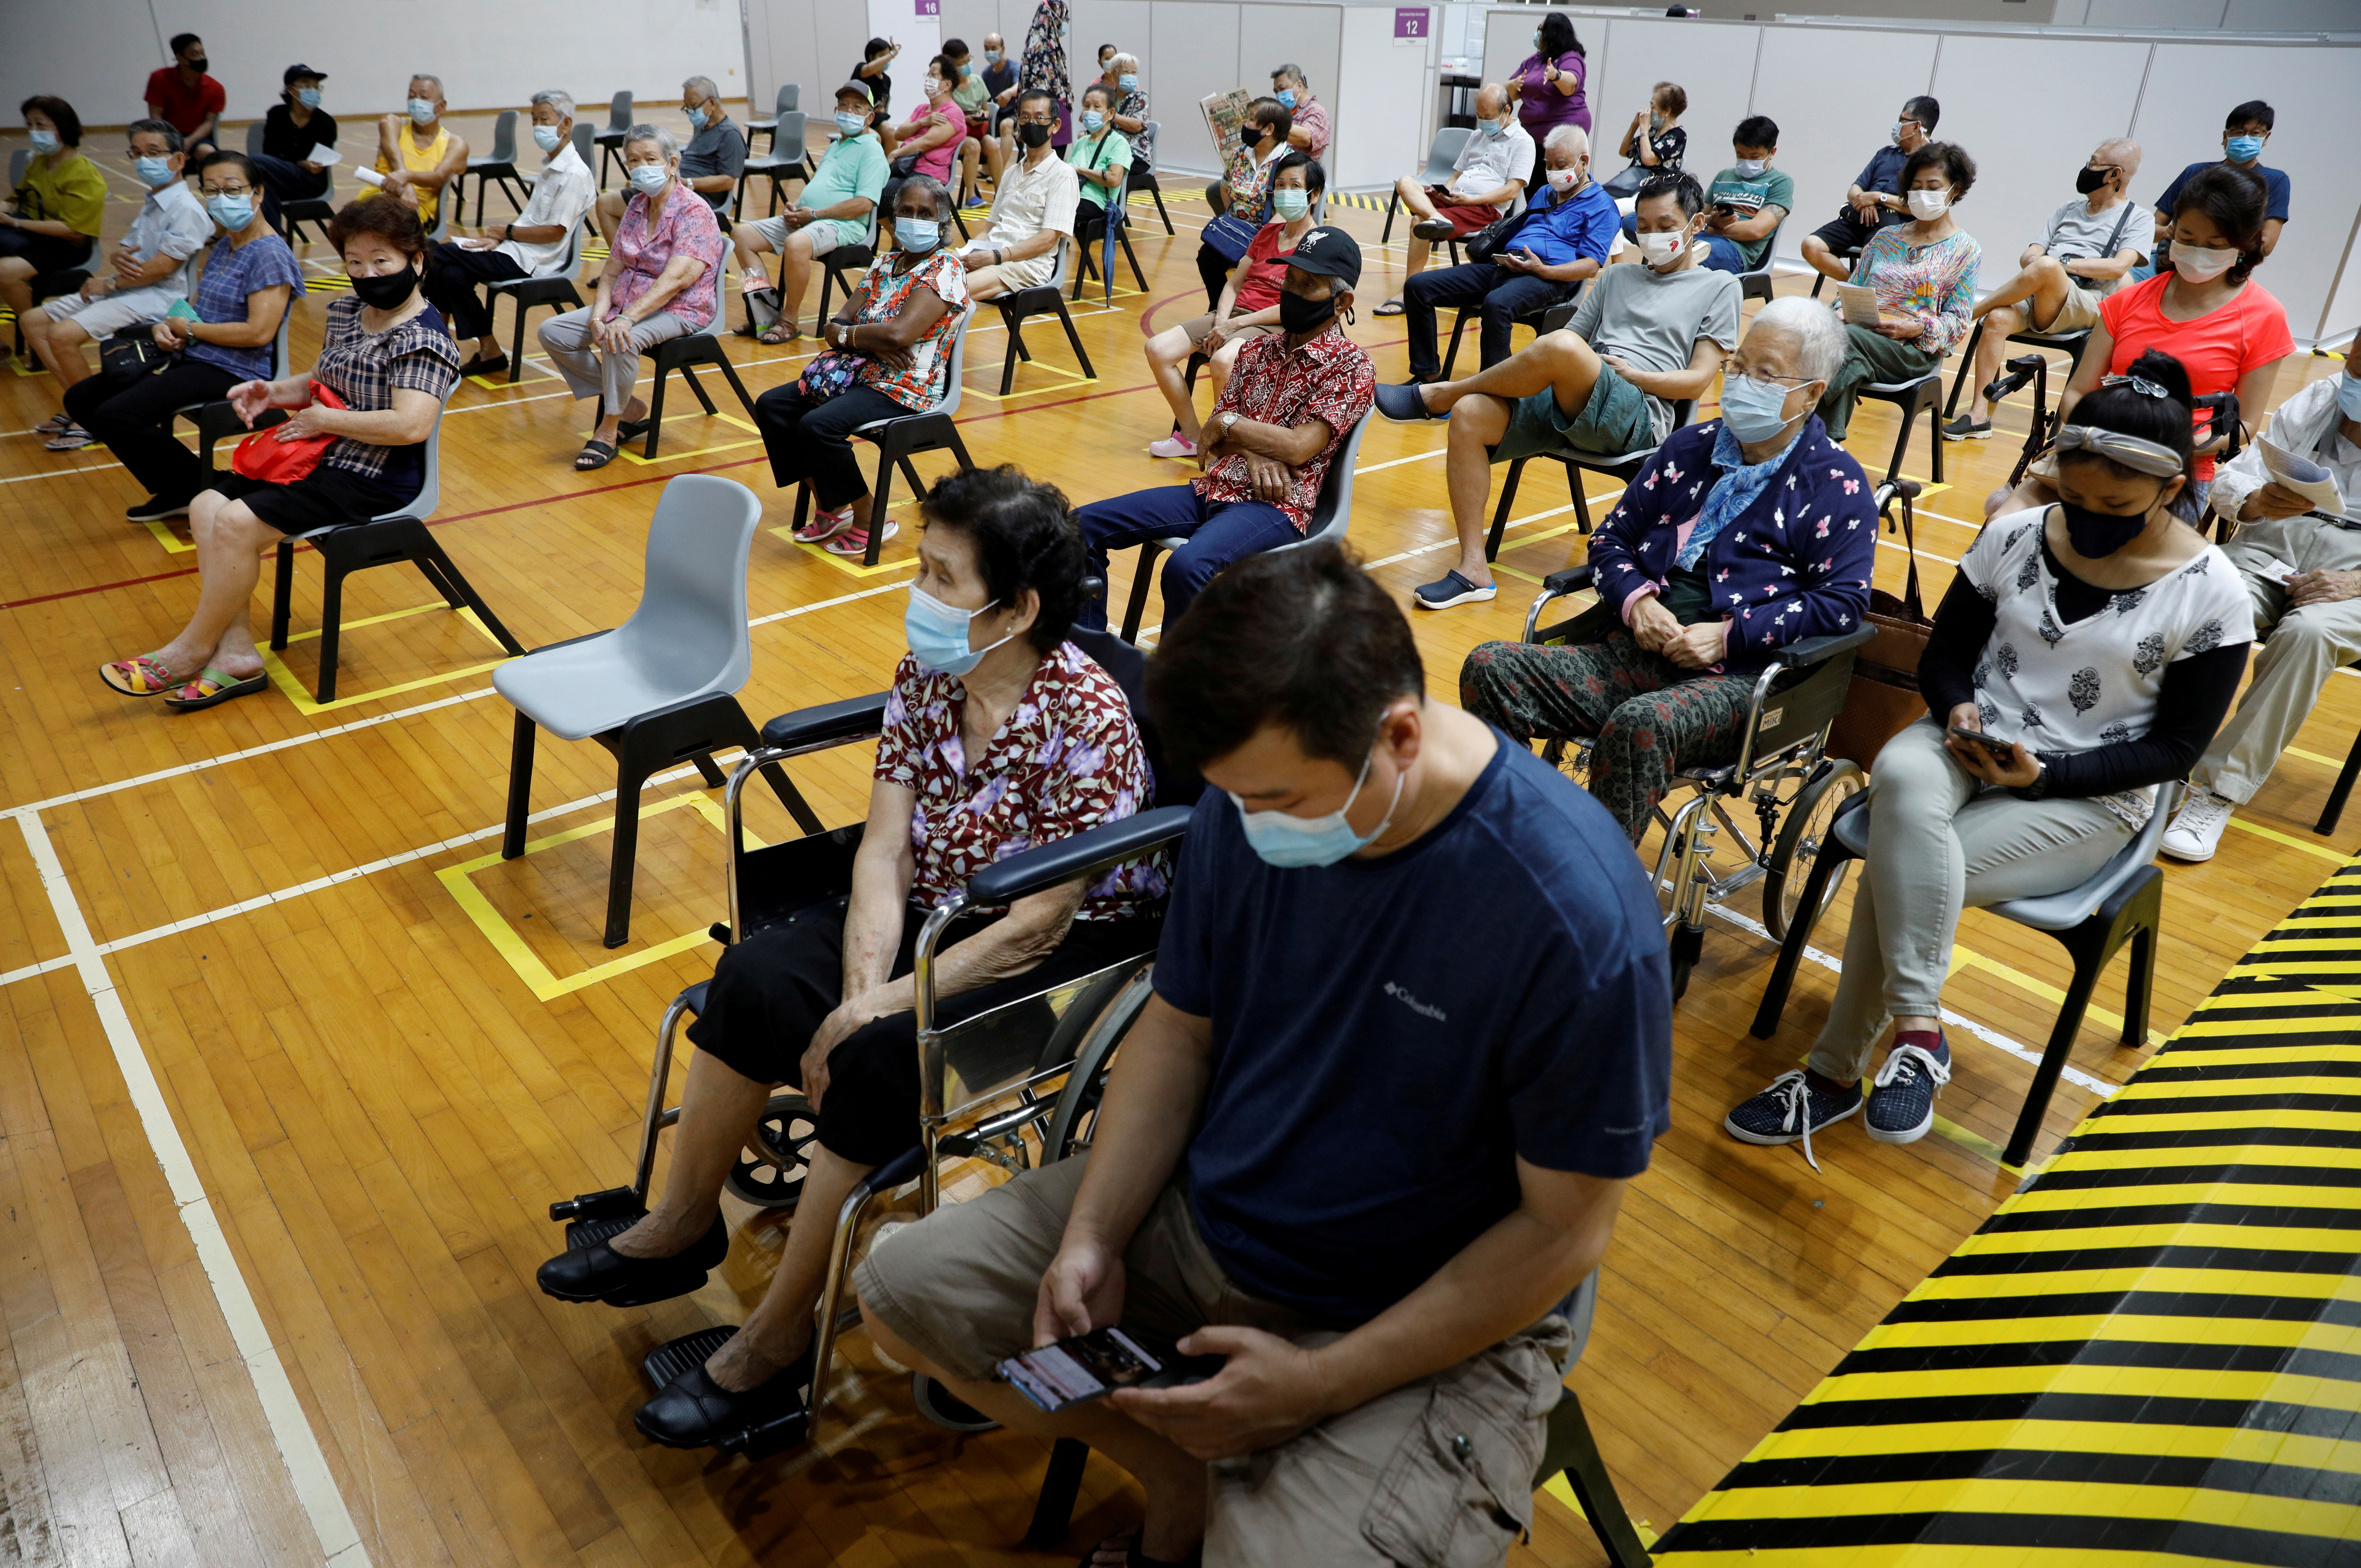 People wait at an observation area after their vaccination at a coronavirus disease (COVID-19) vaccination center in Singapore